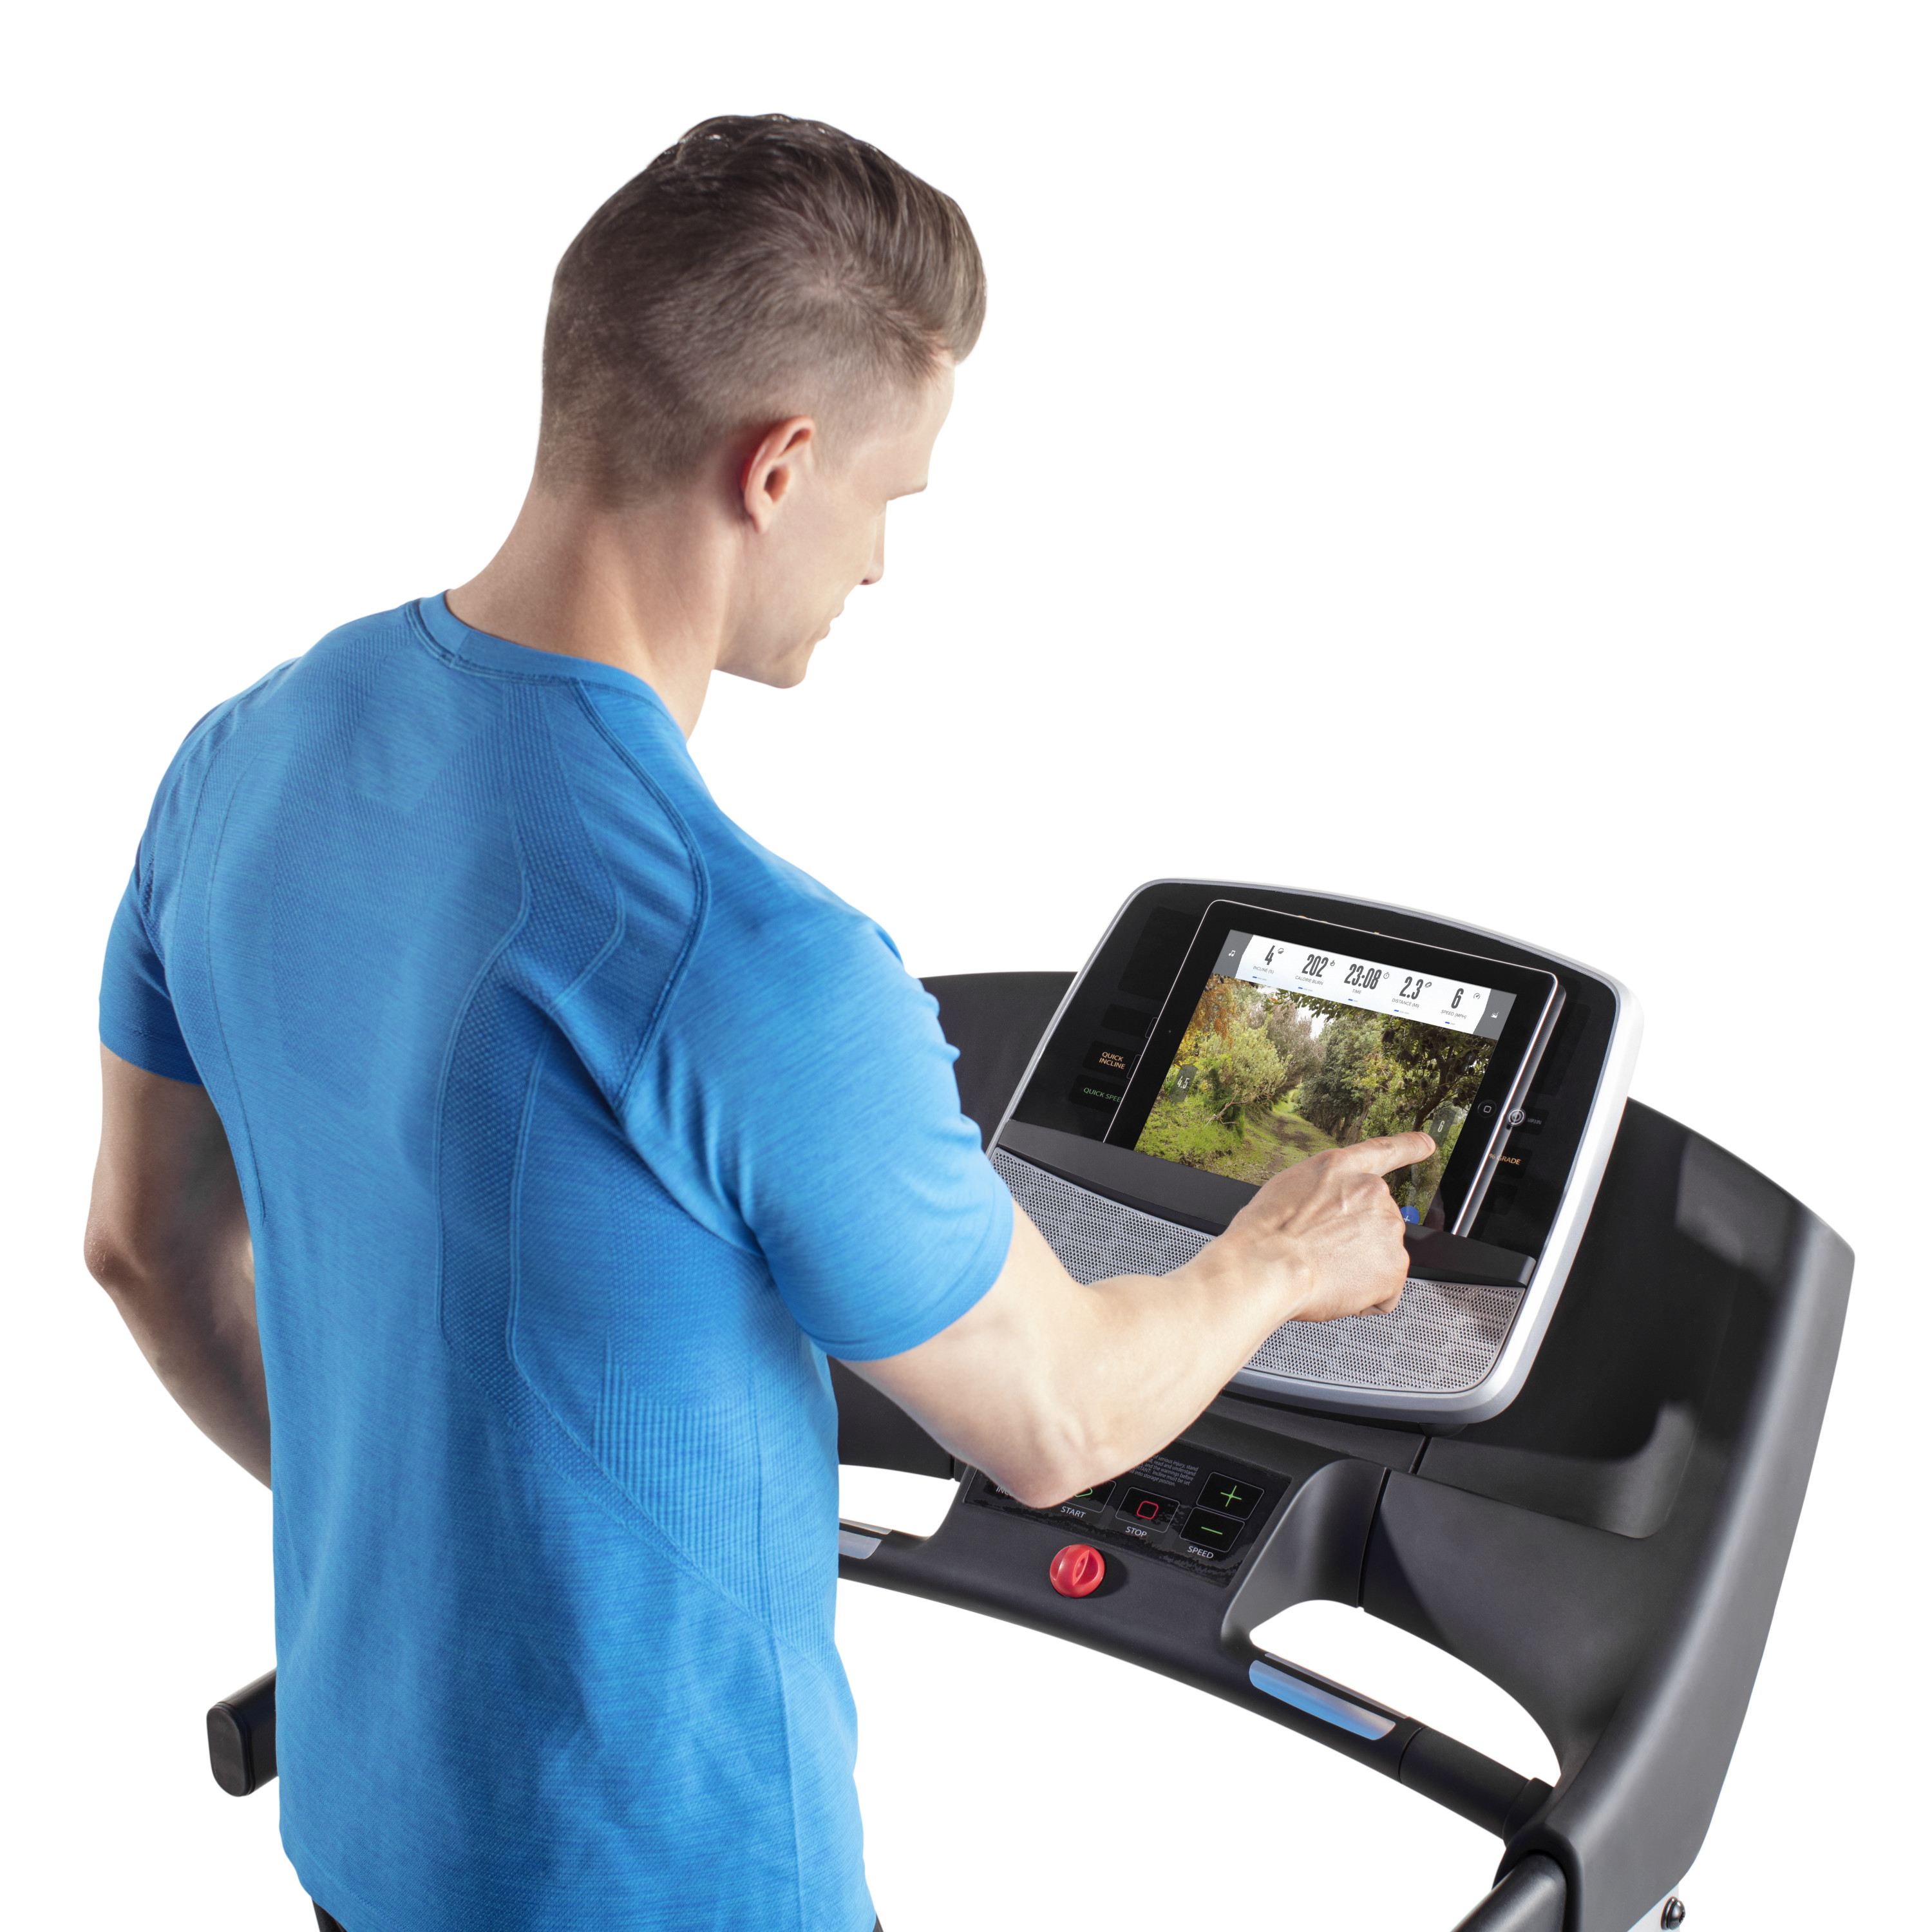 ProForm Trainer 430i Folding Smart Treadmill with 10% Incline, iFit Bluetooth Enabled - image 10 of 18